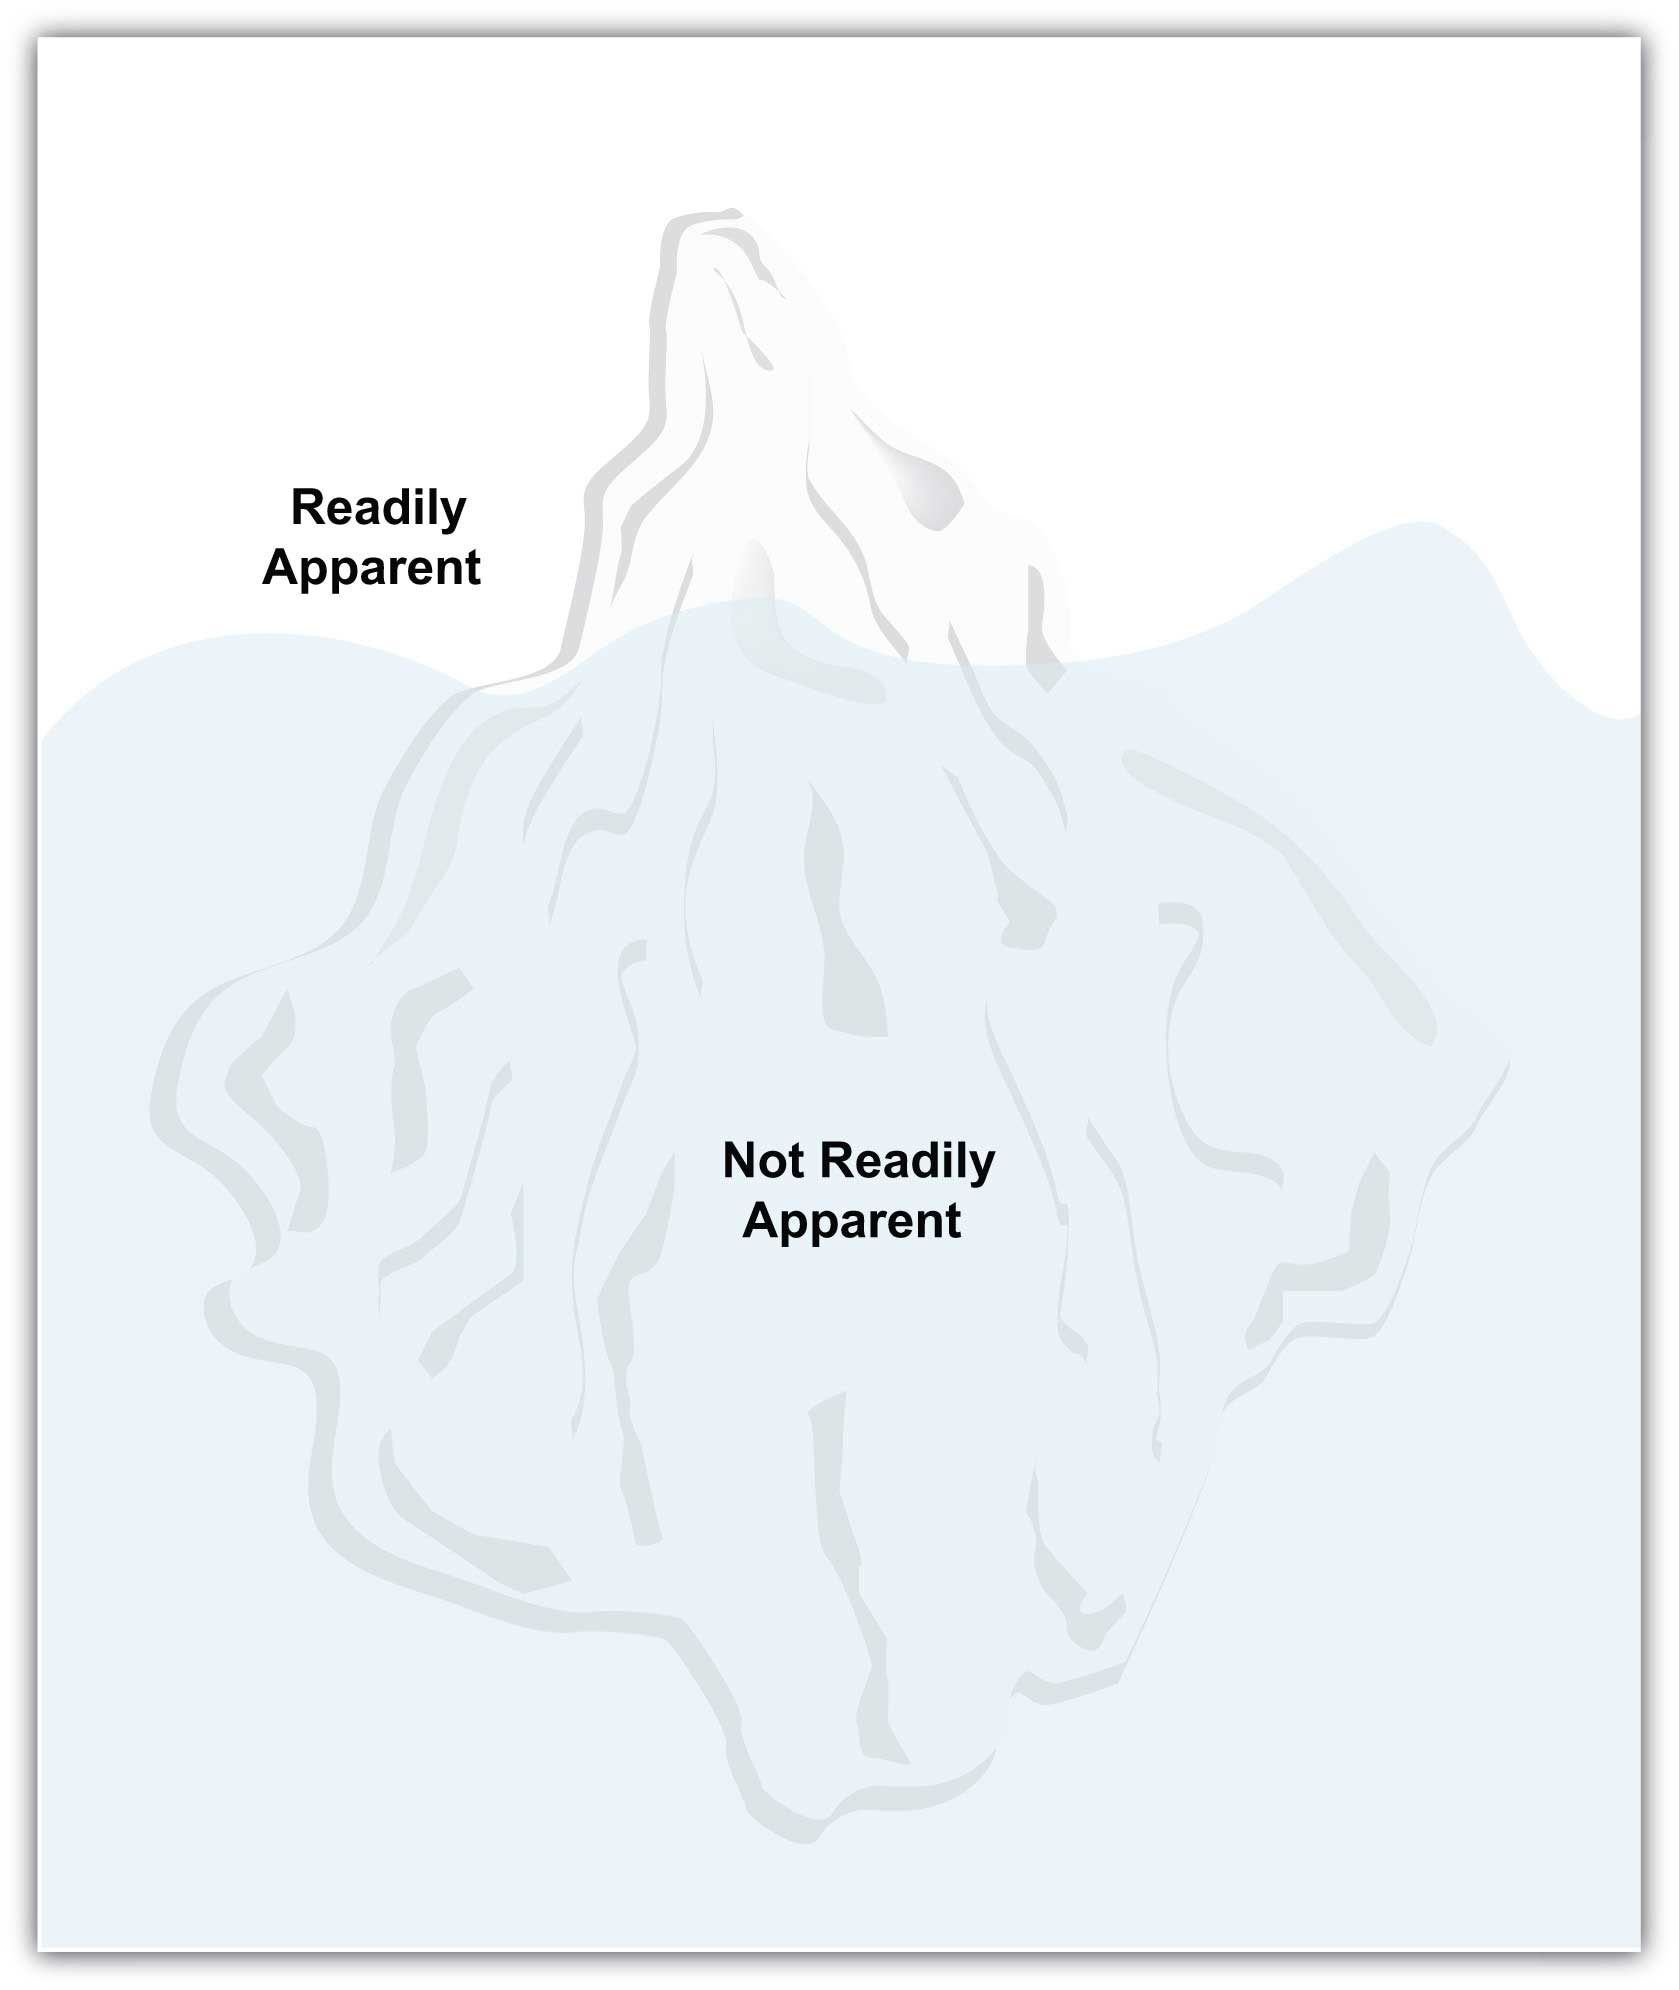 An iceberg above water with "readily apparent" as the label. "Not readily apparent" is the iceberg below the surface. 